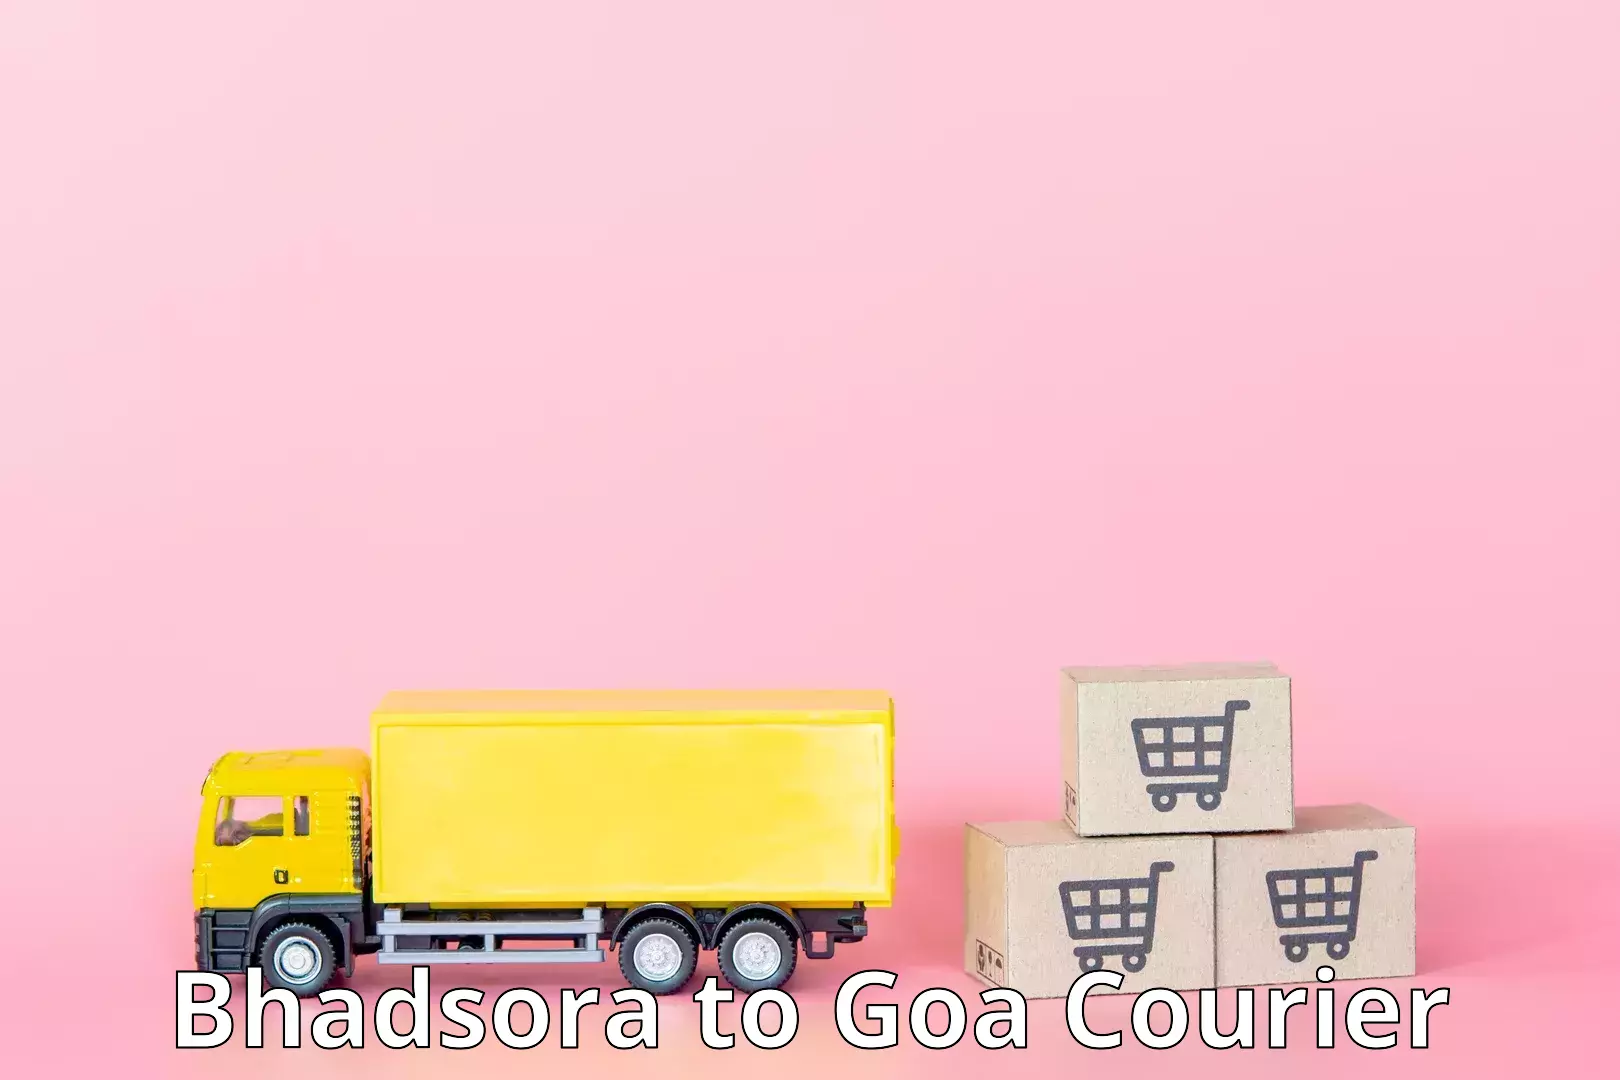 Global shipping solutions Bhadsora to IIT Goa